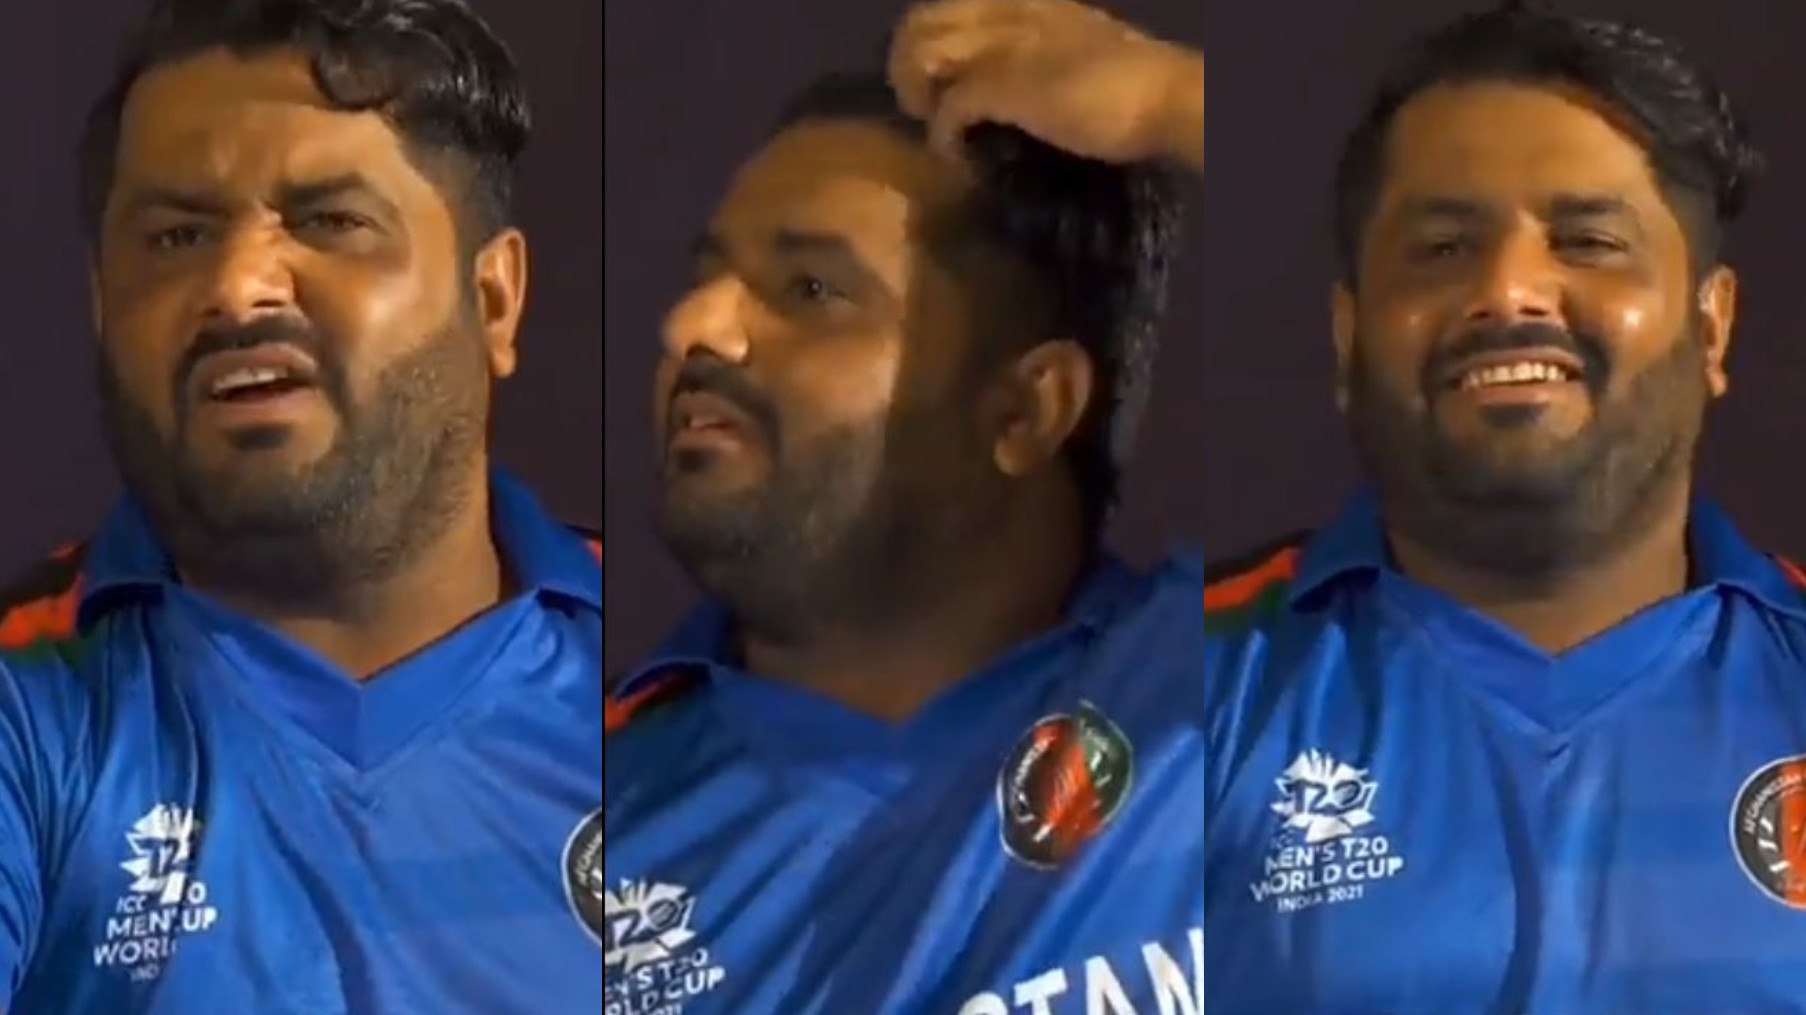 T20 World Cup 2021: WATCH- “Many girls say you're looking cute, it's all natural beauty” - Mohammad Shahzad at his funniest